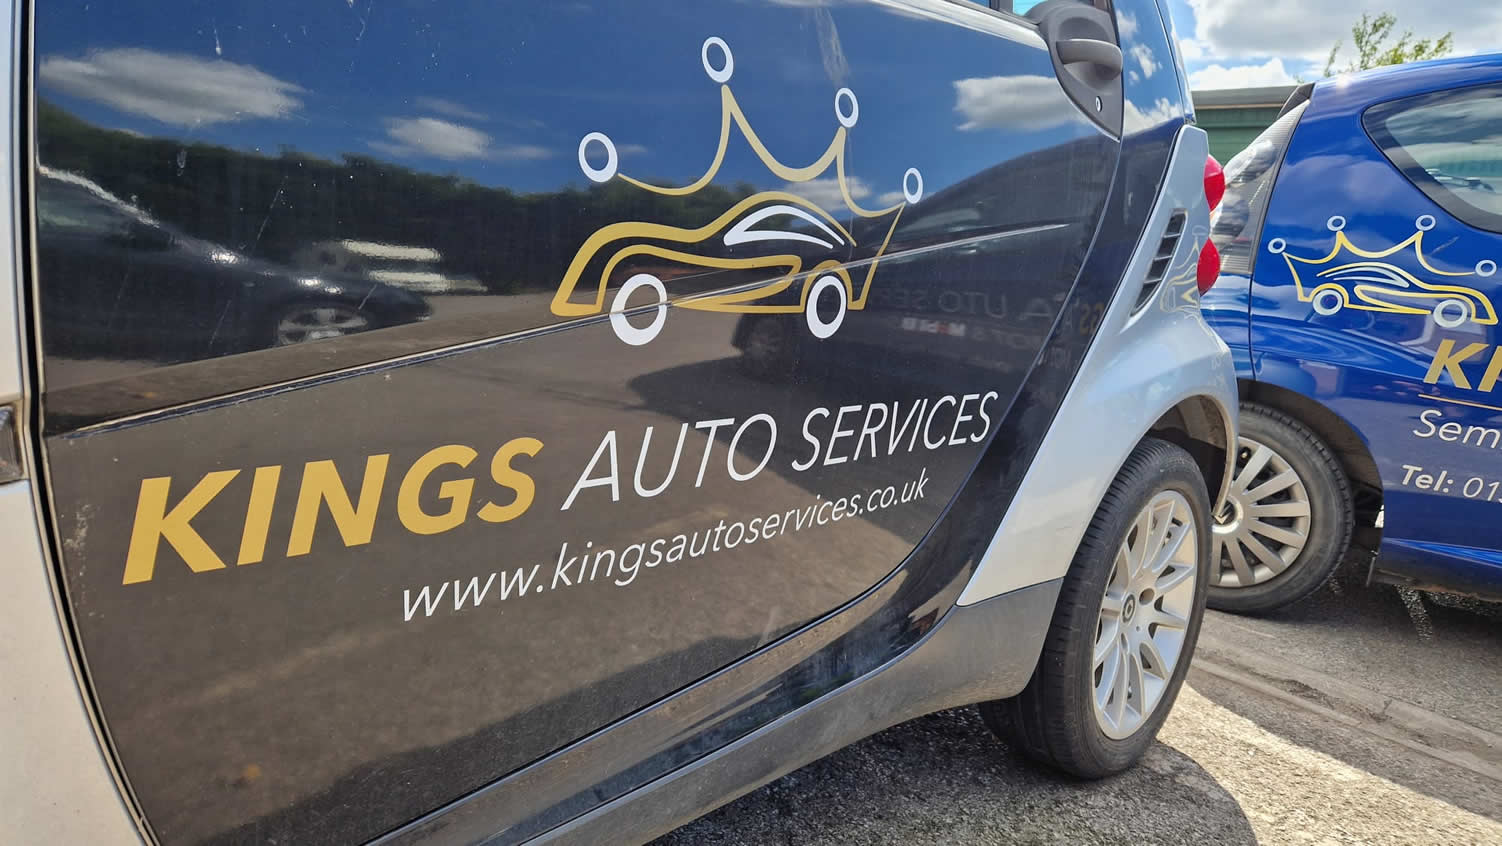 Kings Auto Services car logo sign writing